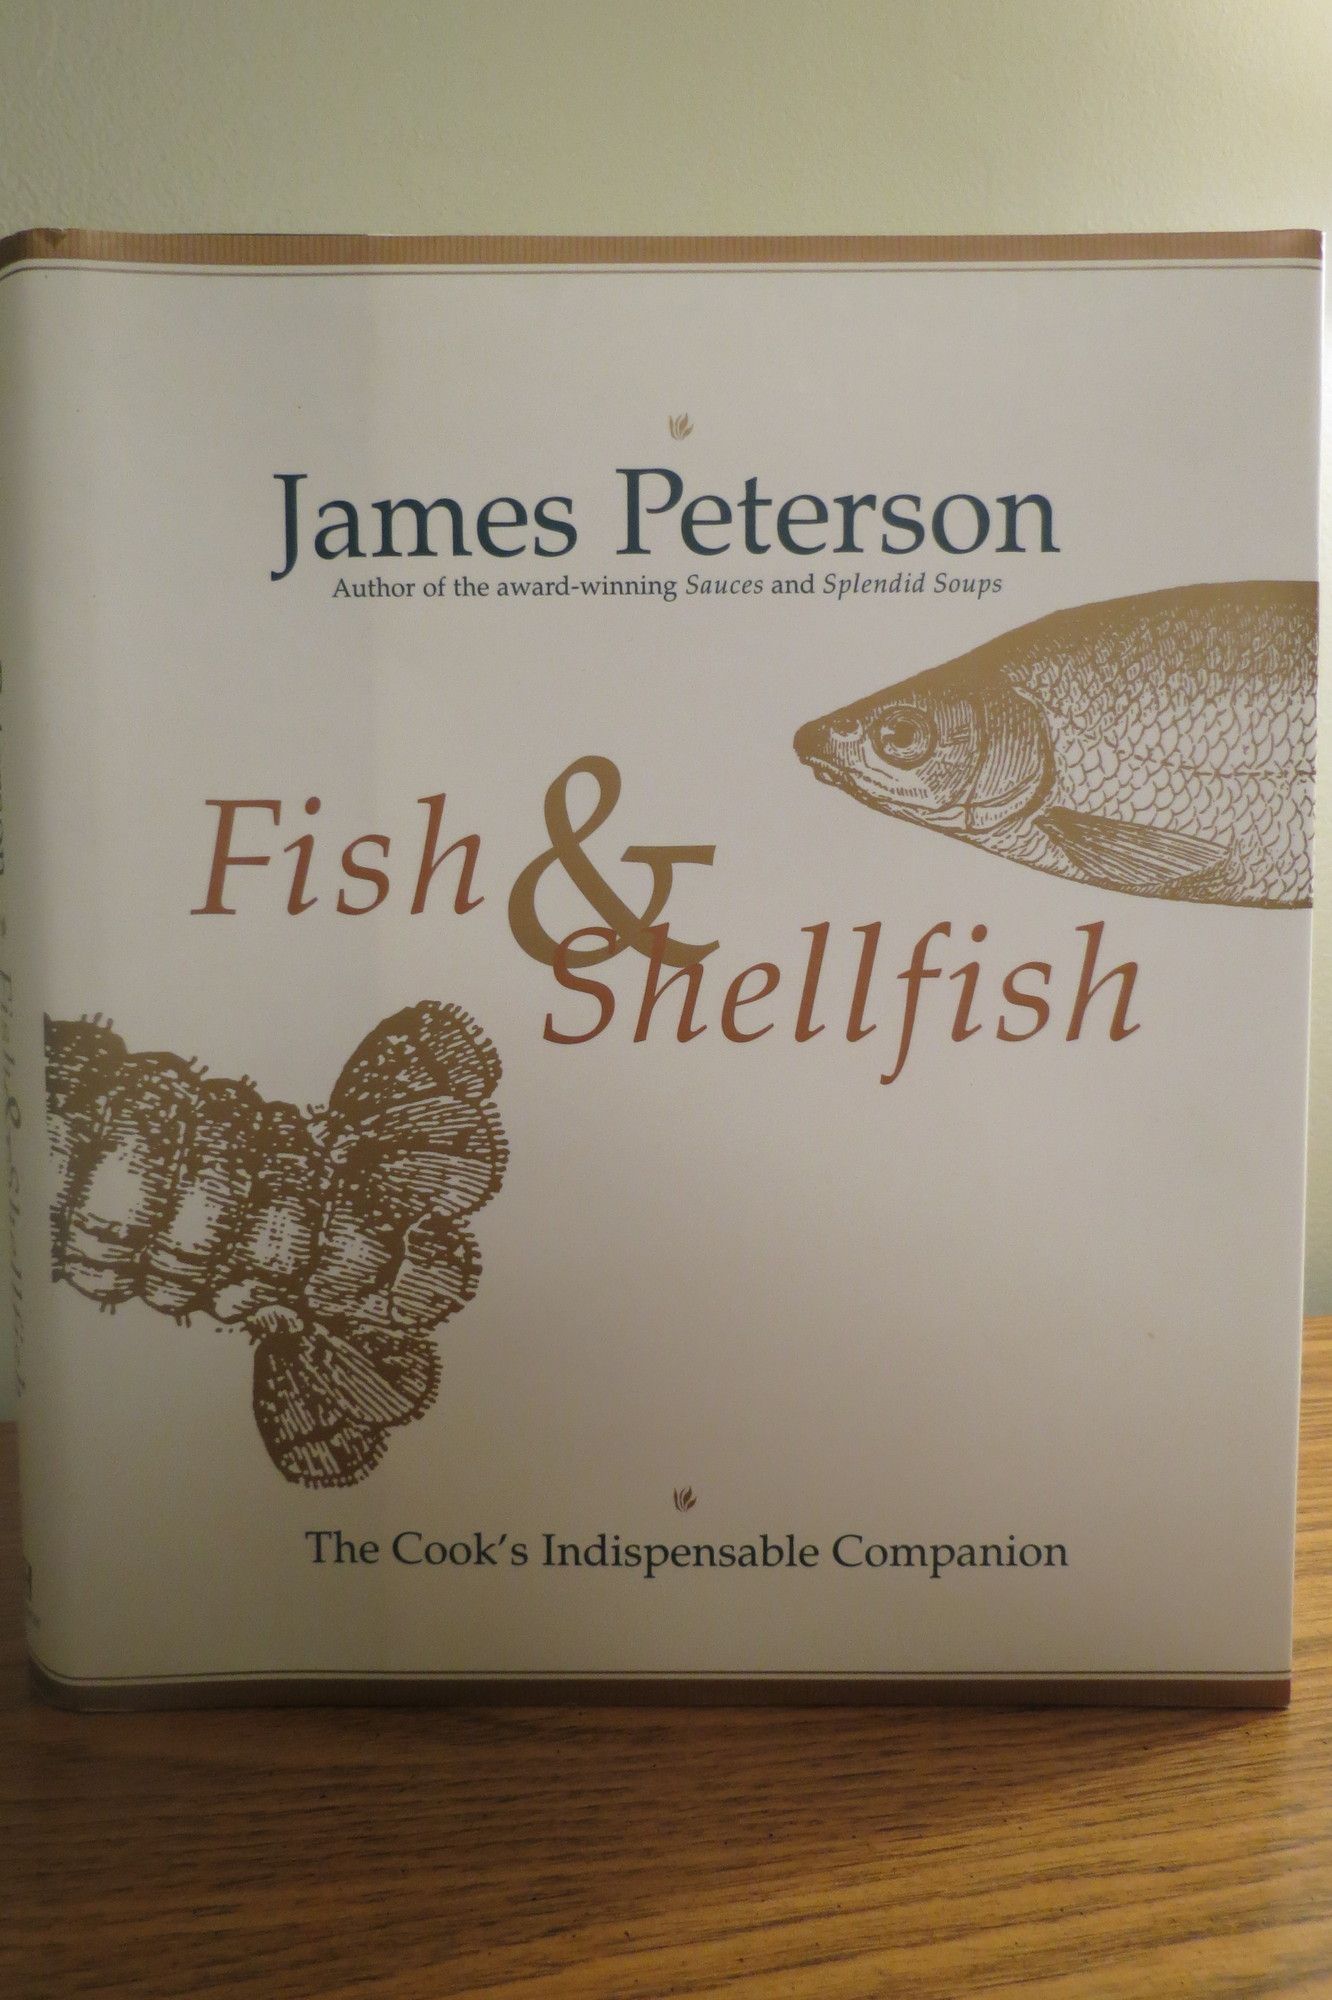 Image for FISH & SHELLFISH The Cook's Indispensable Companion (DJ protected by clear, acid-free mylar cover)